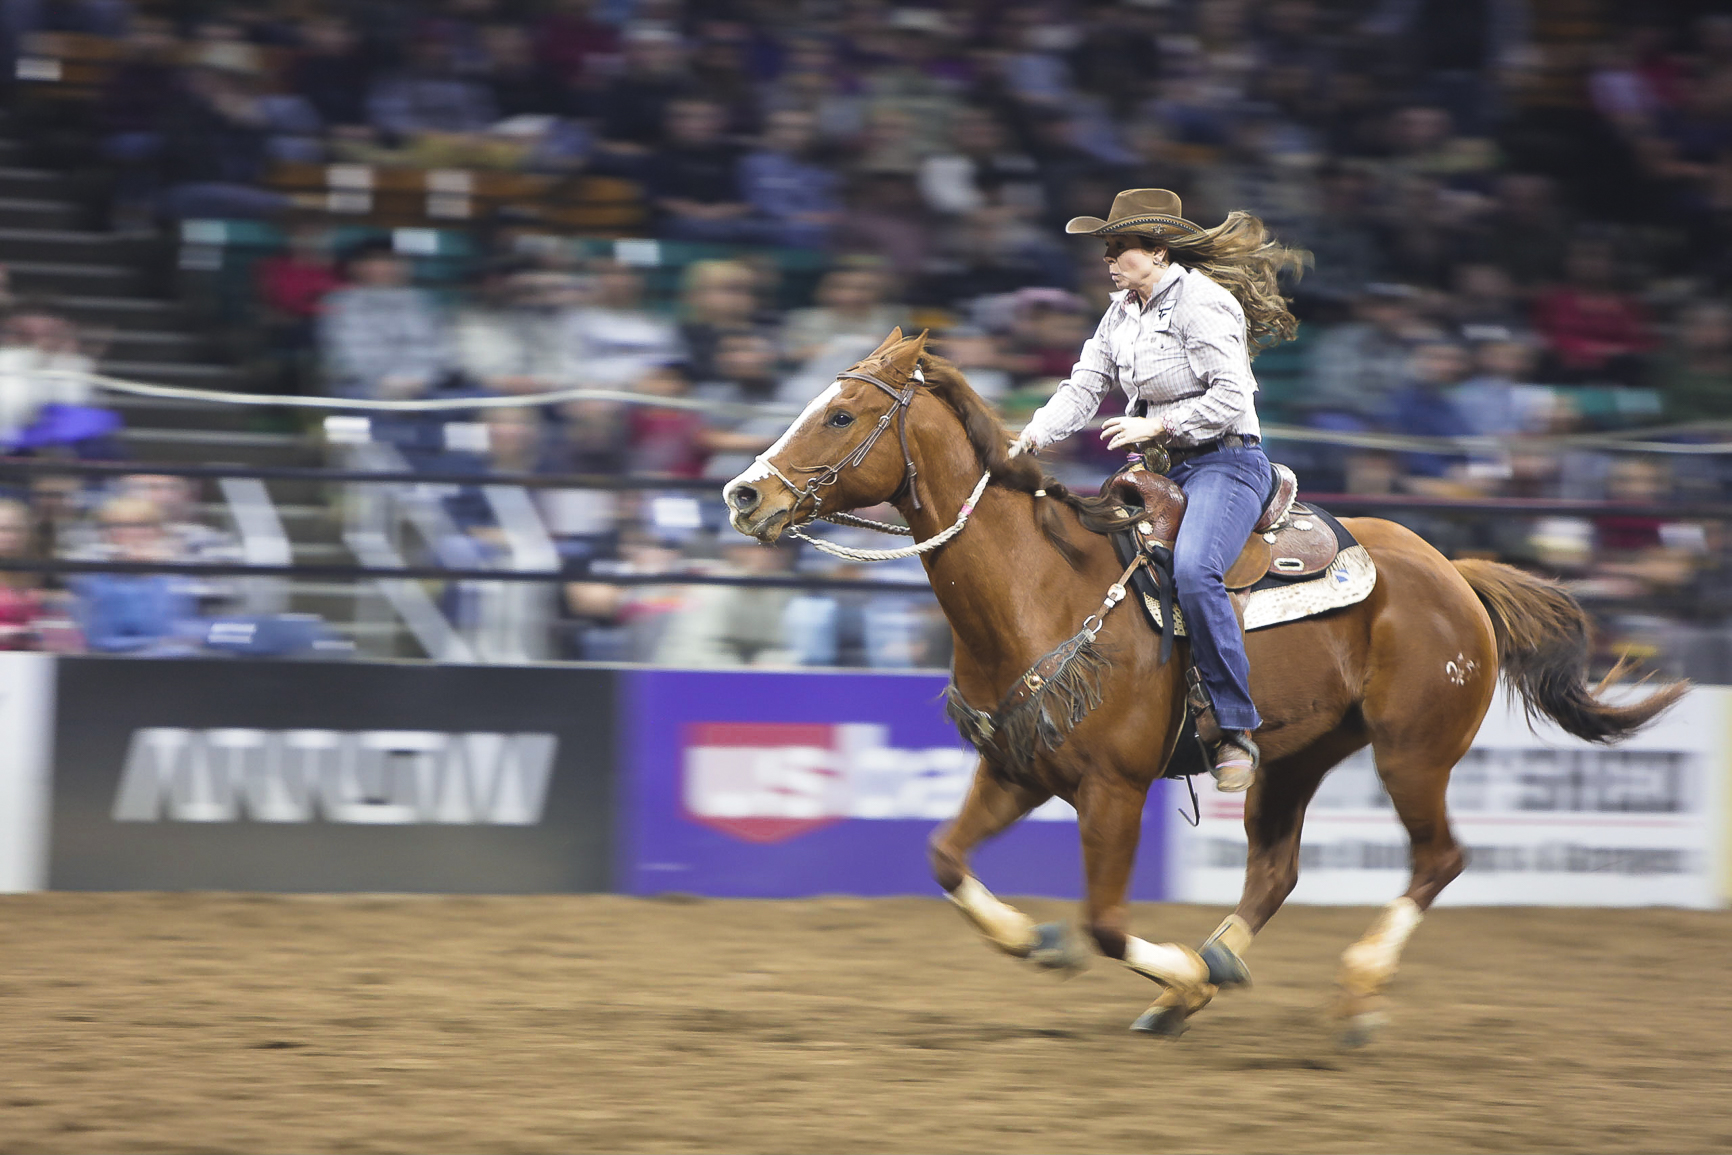  A cowgirl rides her horse during a barrel race at the National Western Stock show in Denver, Colorado, in January 2018. 